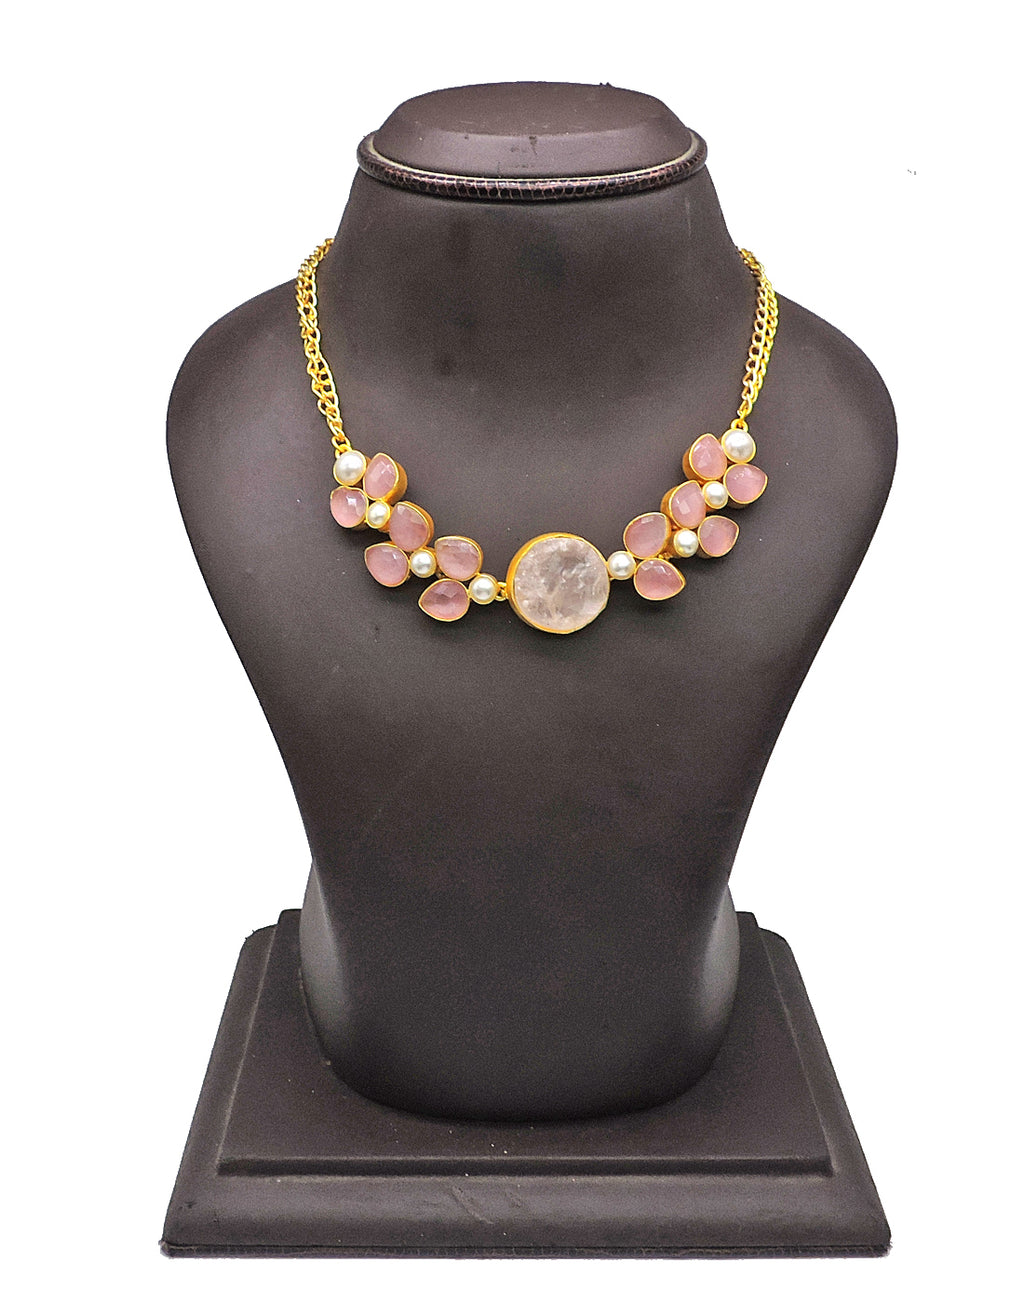 Jewelled Rose Necklace - Statement Necklaces - Gold-Plated & Hypoallergenic Jewellery - Made in India - Dubai Jewellery - Dori